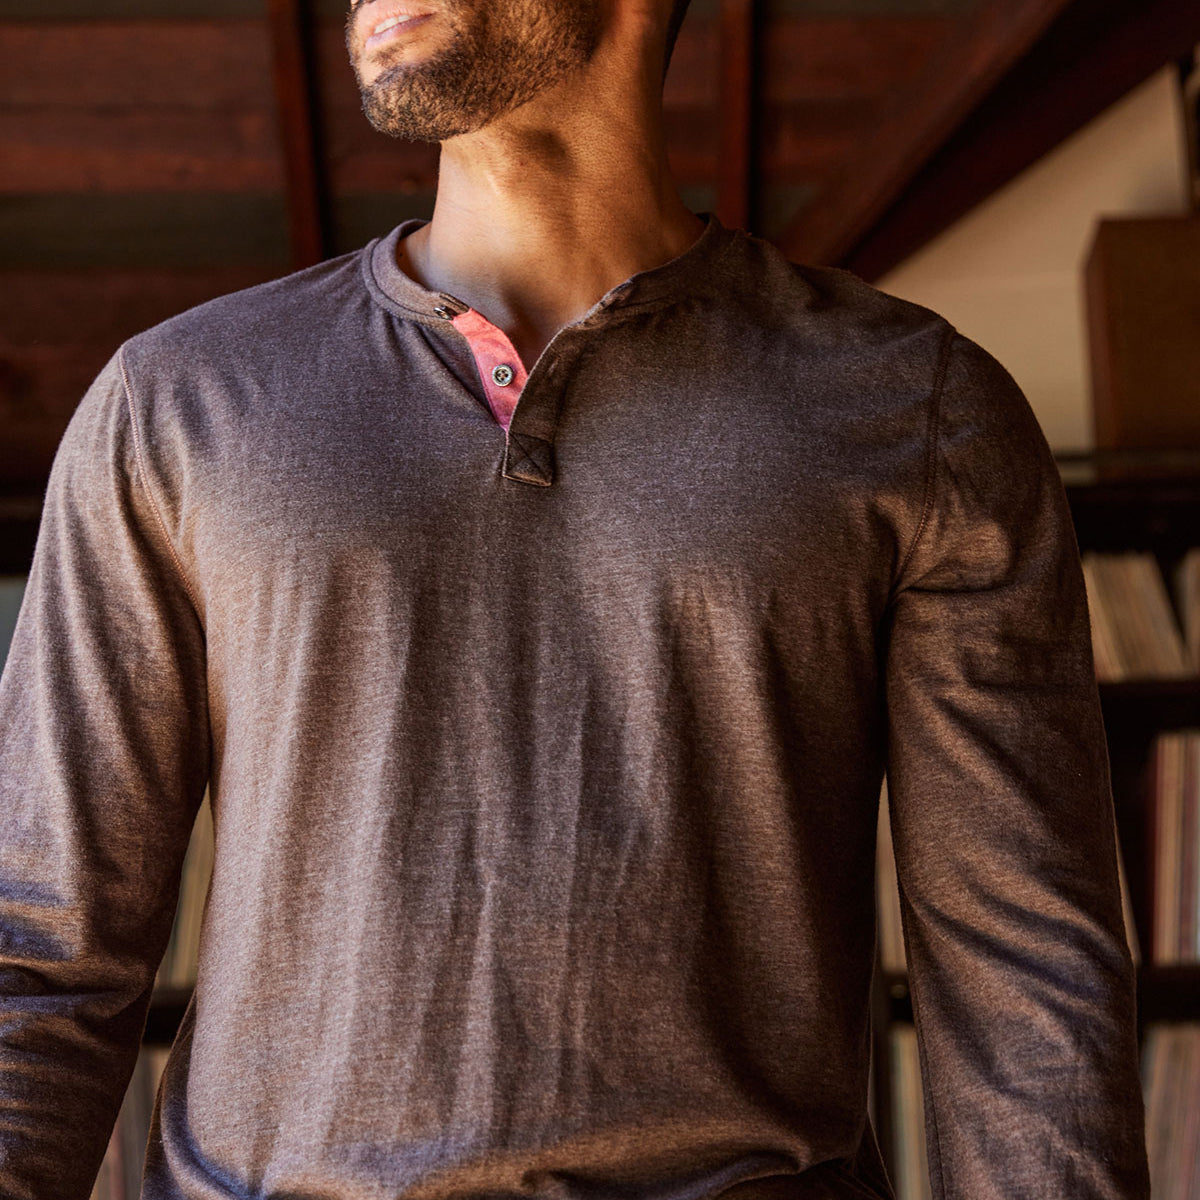 Men's Long Sleeve Tops – Threads 4 Thought